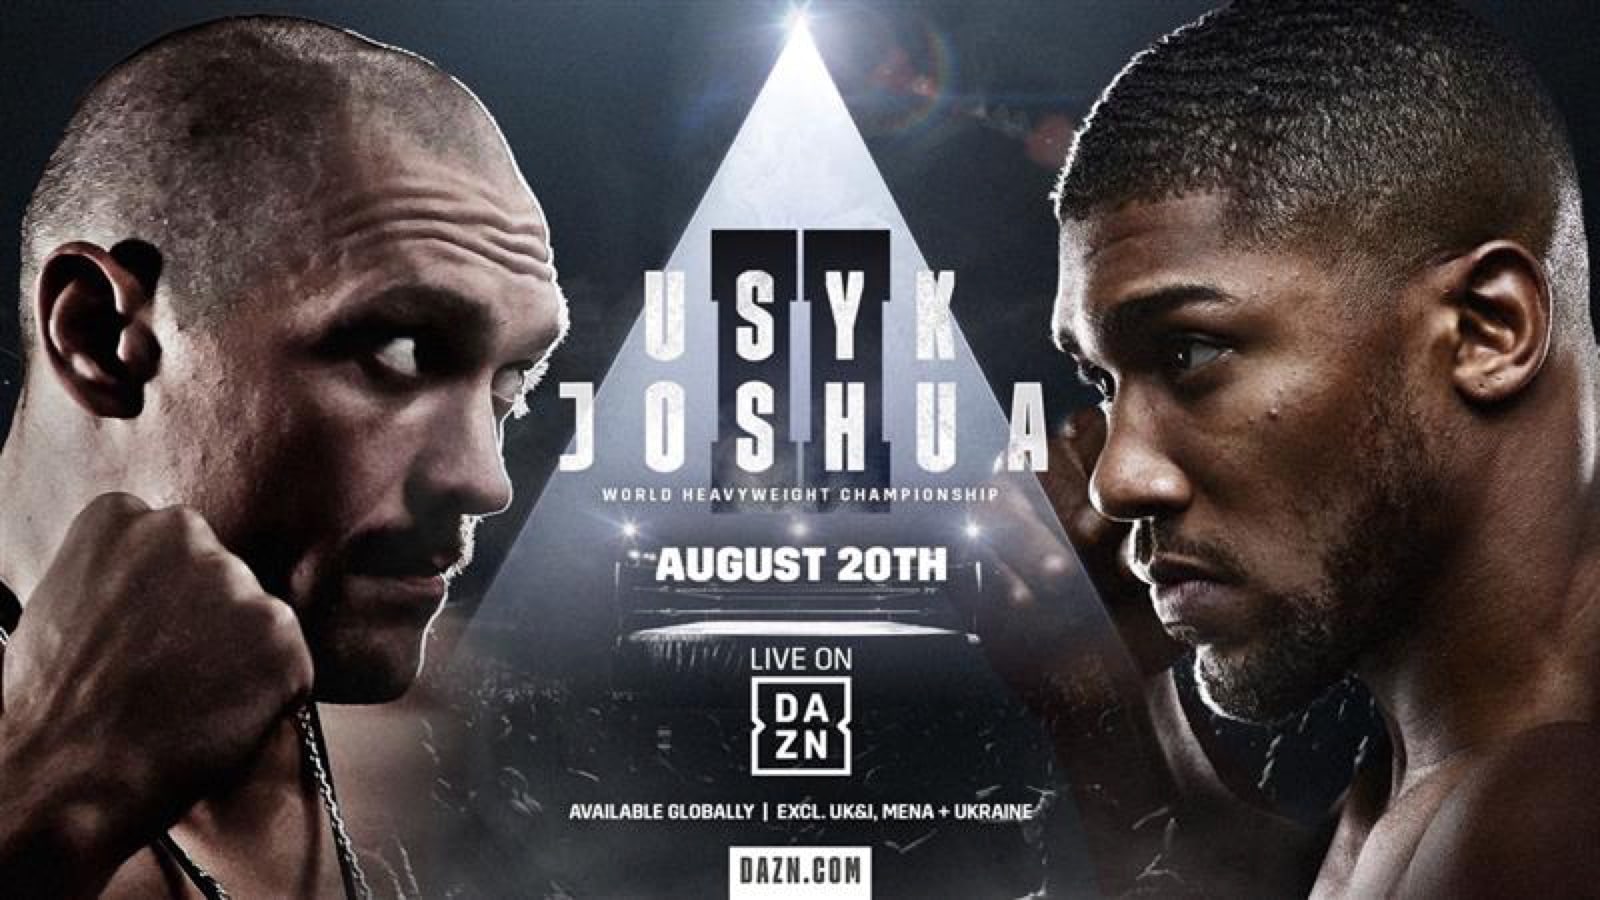 Usyk Vs Joshua II What Time Does The Main Event Start On DAZN?